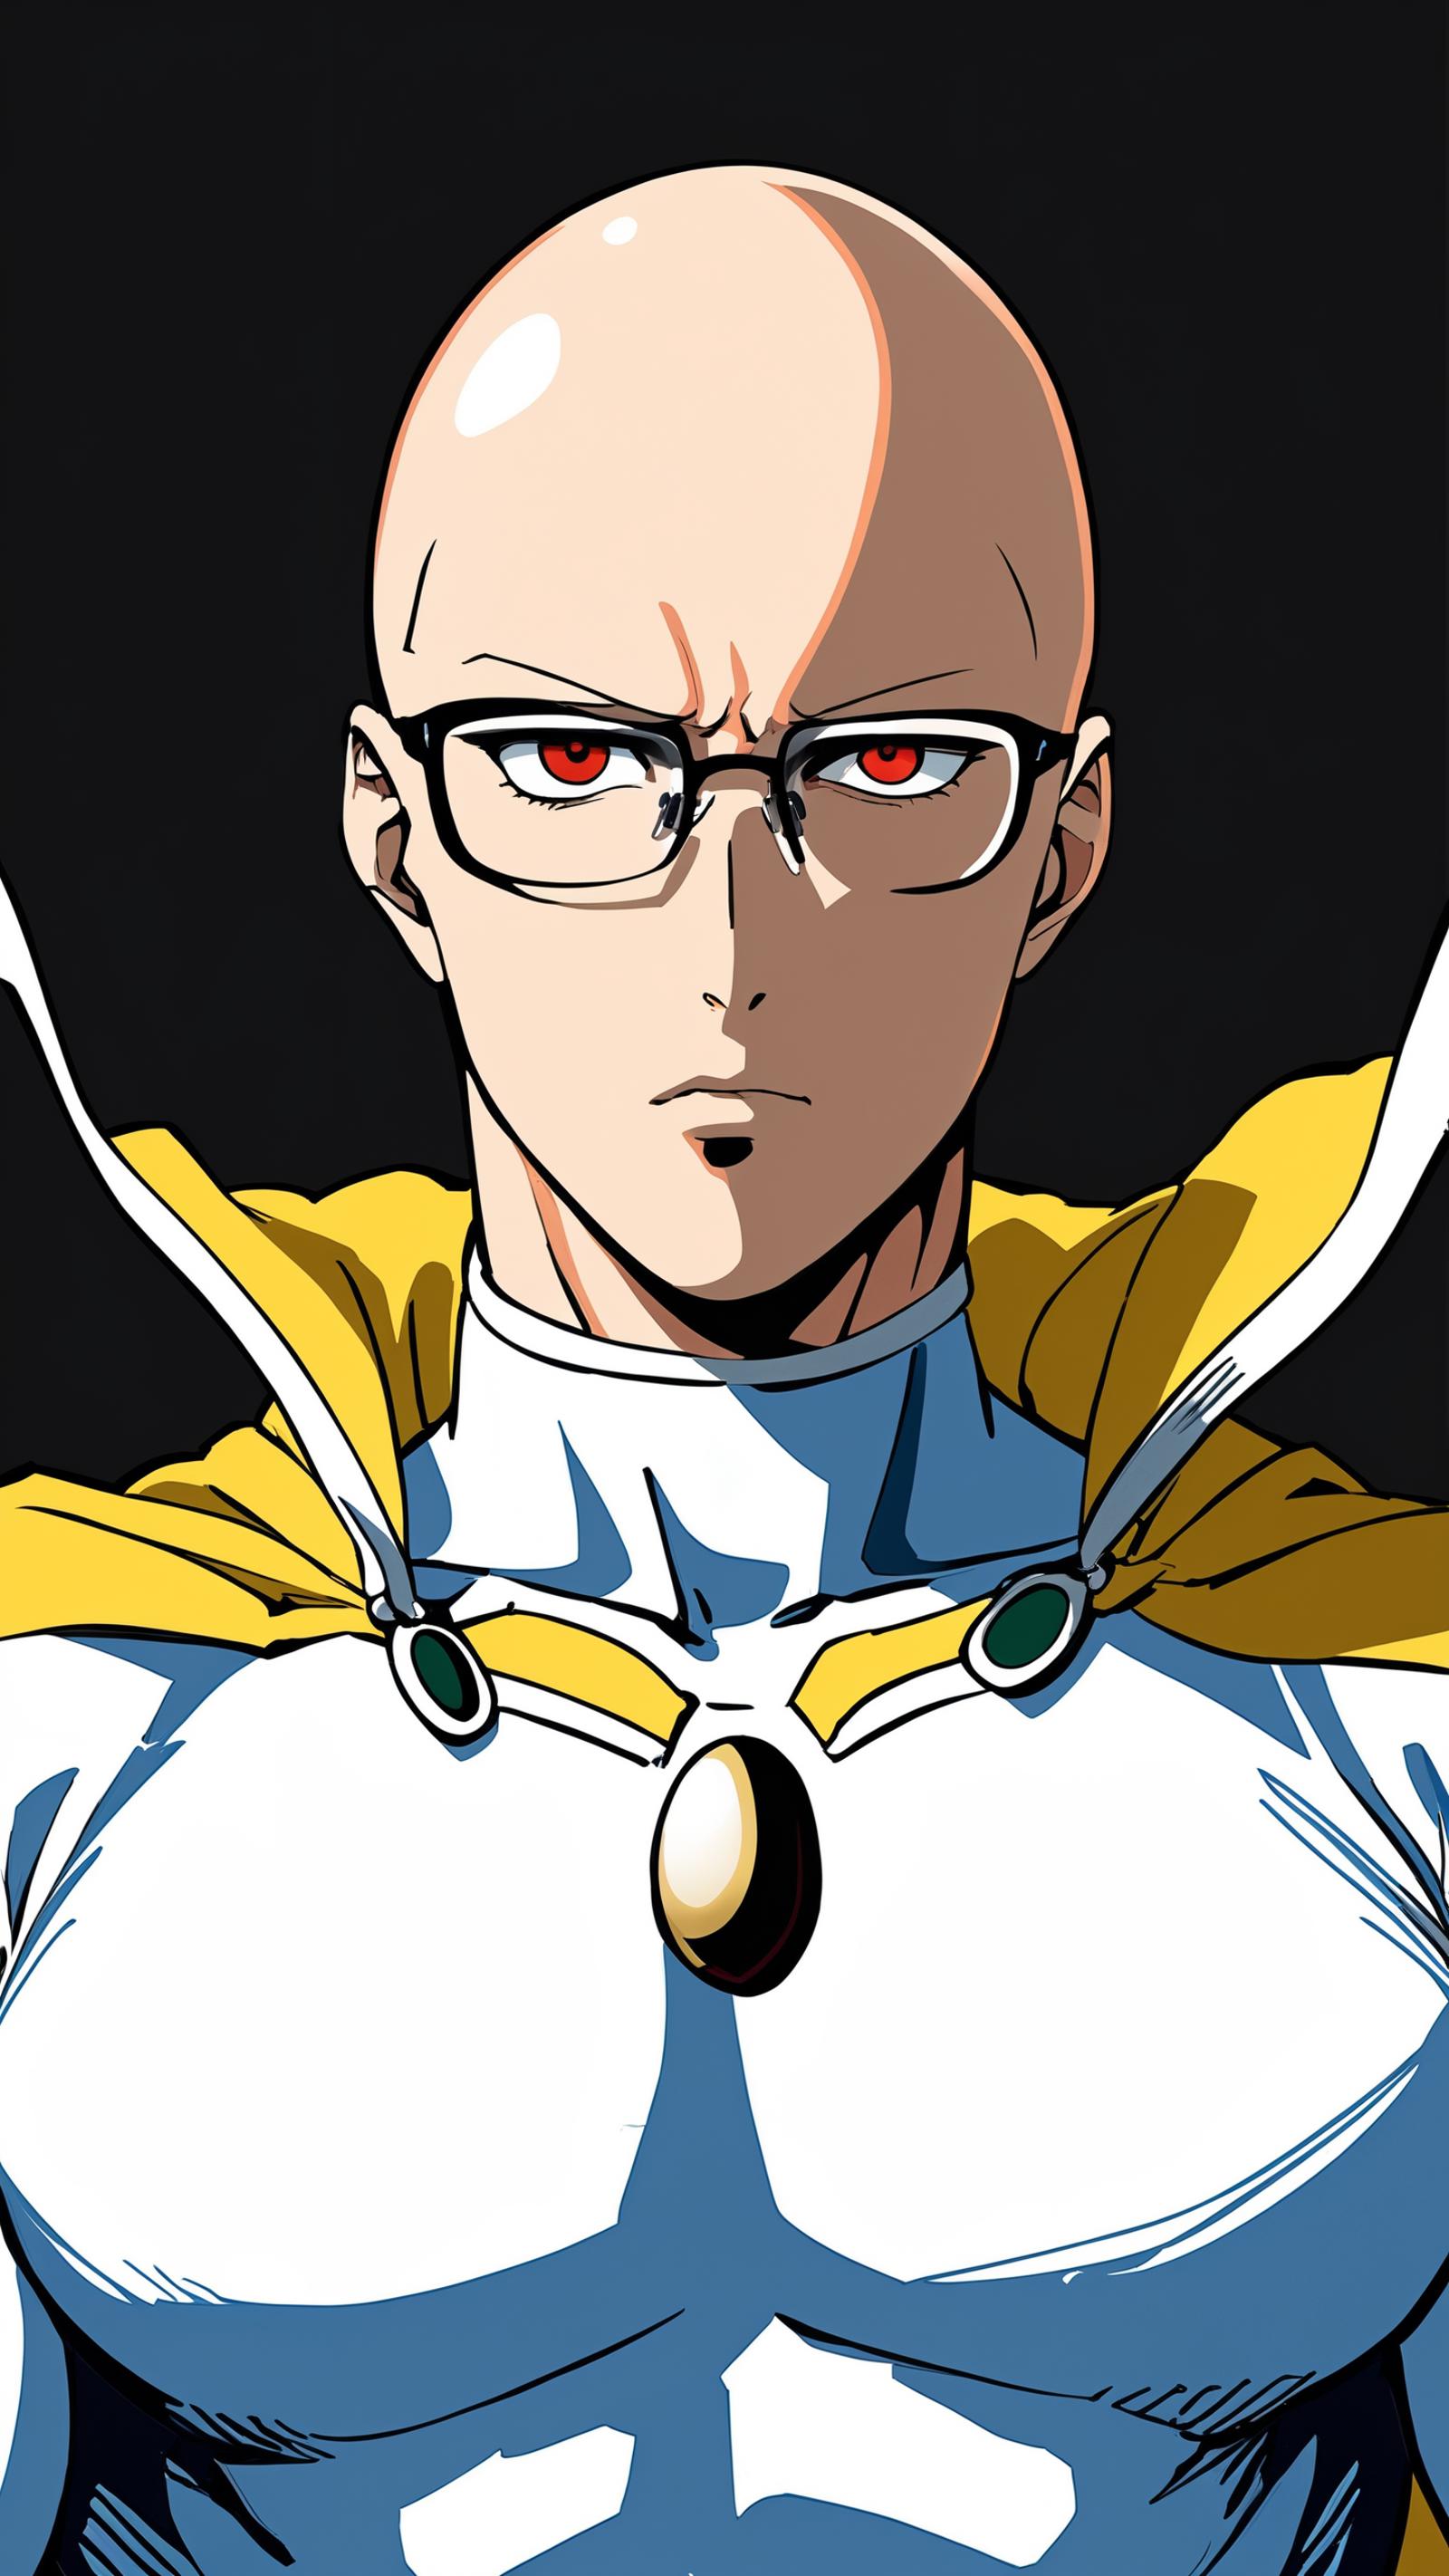 A comic book character wearing a white shirt and a yellow cape with a green jewel.